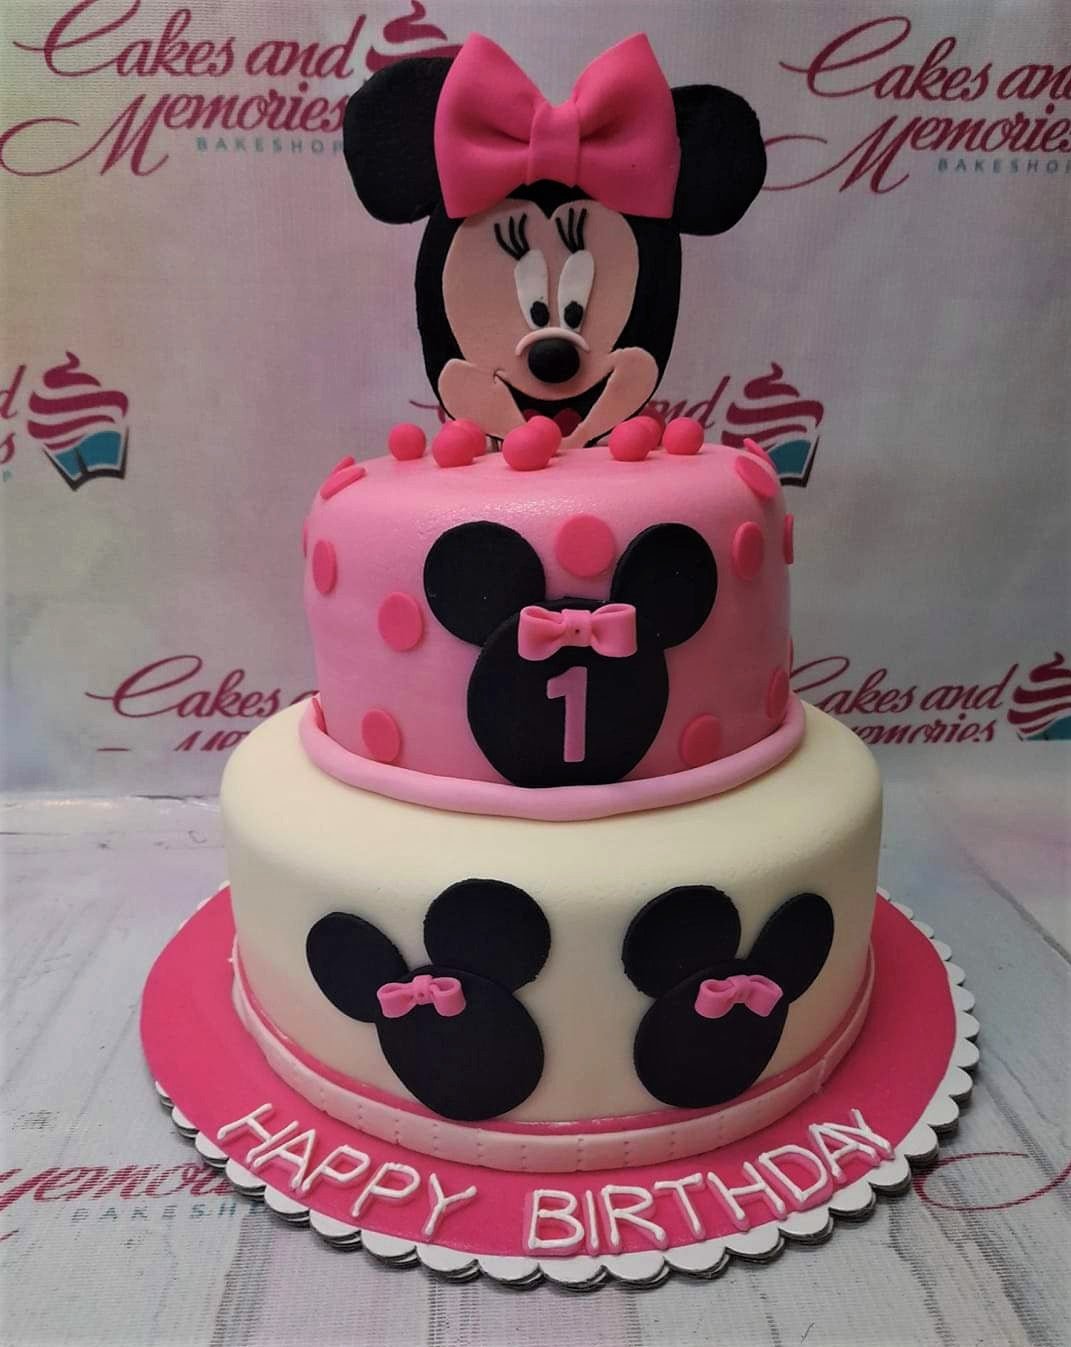 Shop for Fresh 2 Tier Mickey Mouse Fondant Cake online - Amer